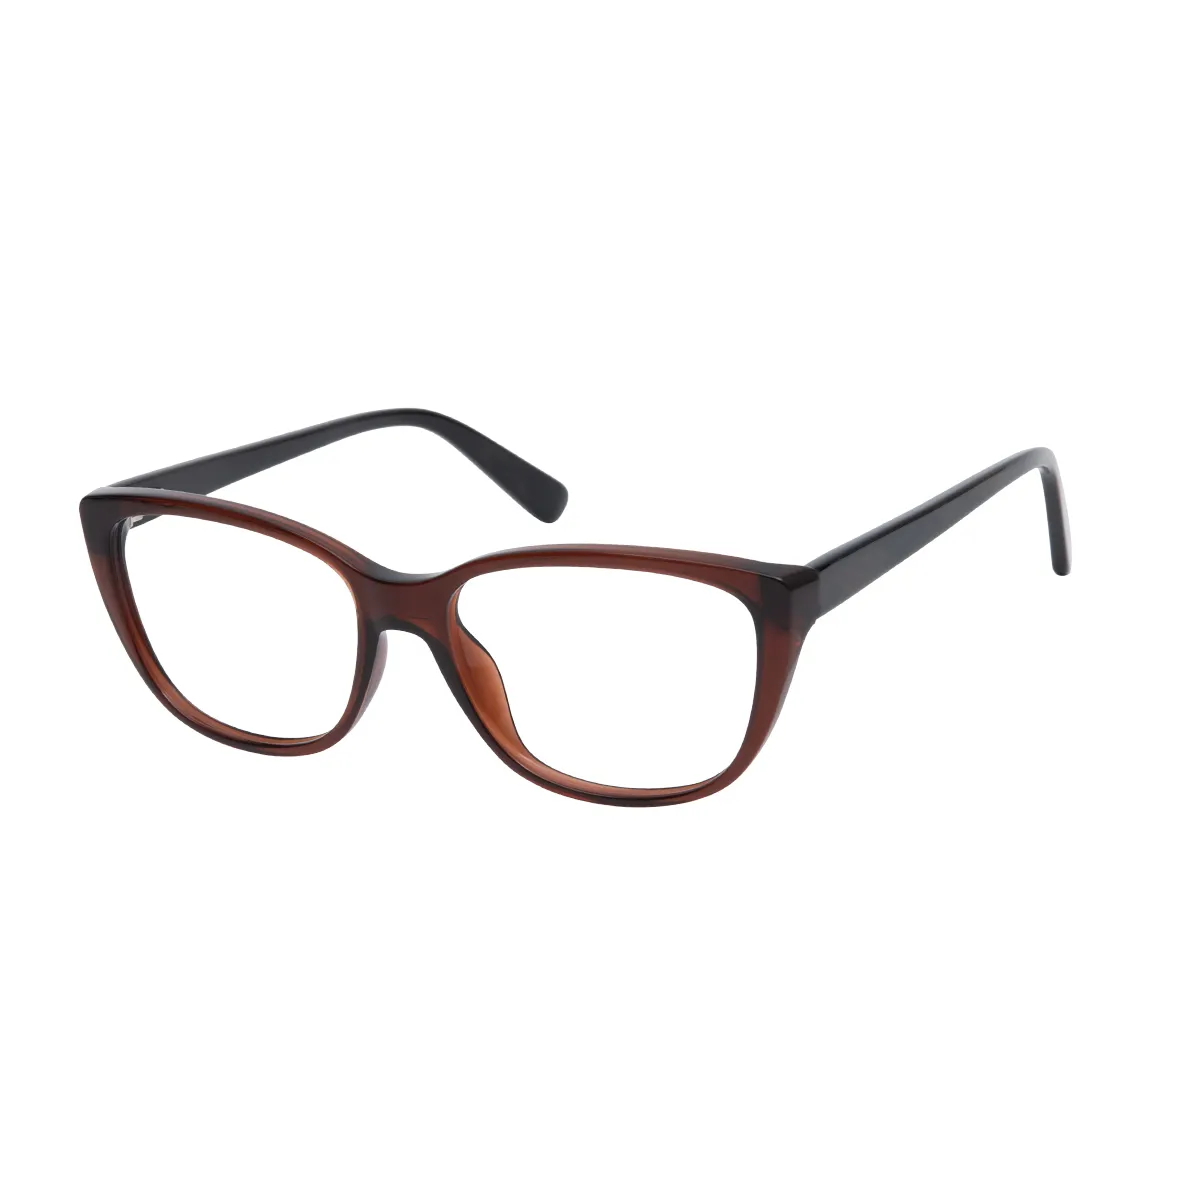 Adriana - Oval Brown Glasses for Women